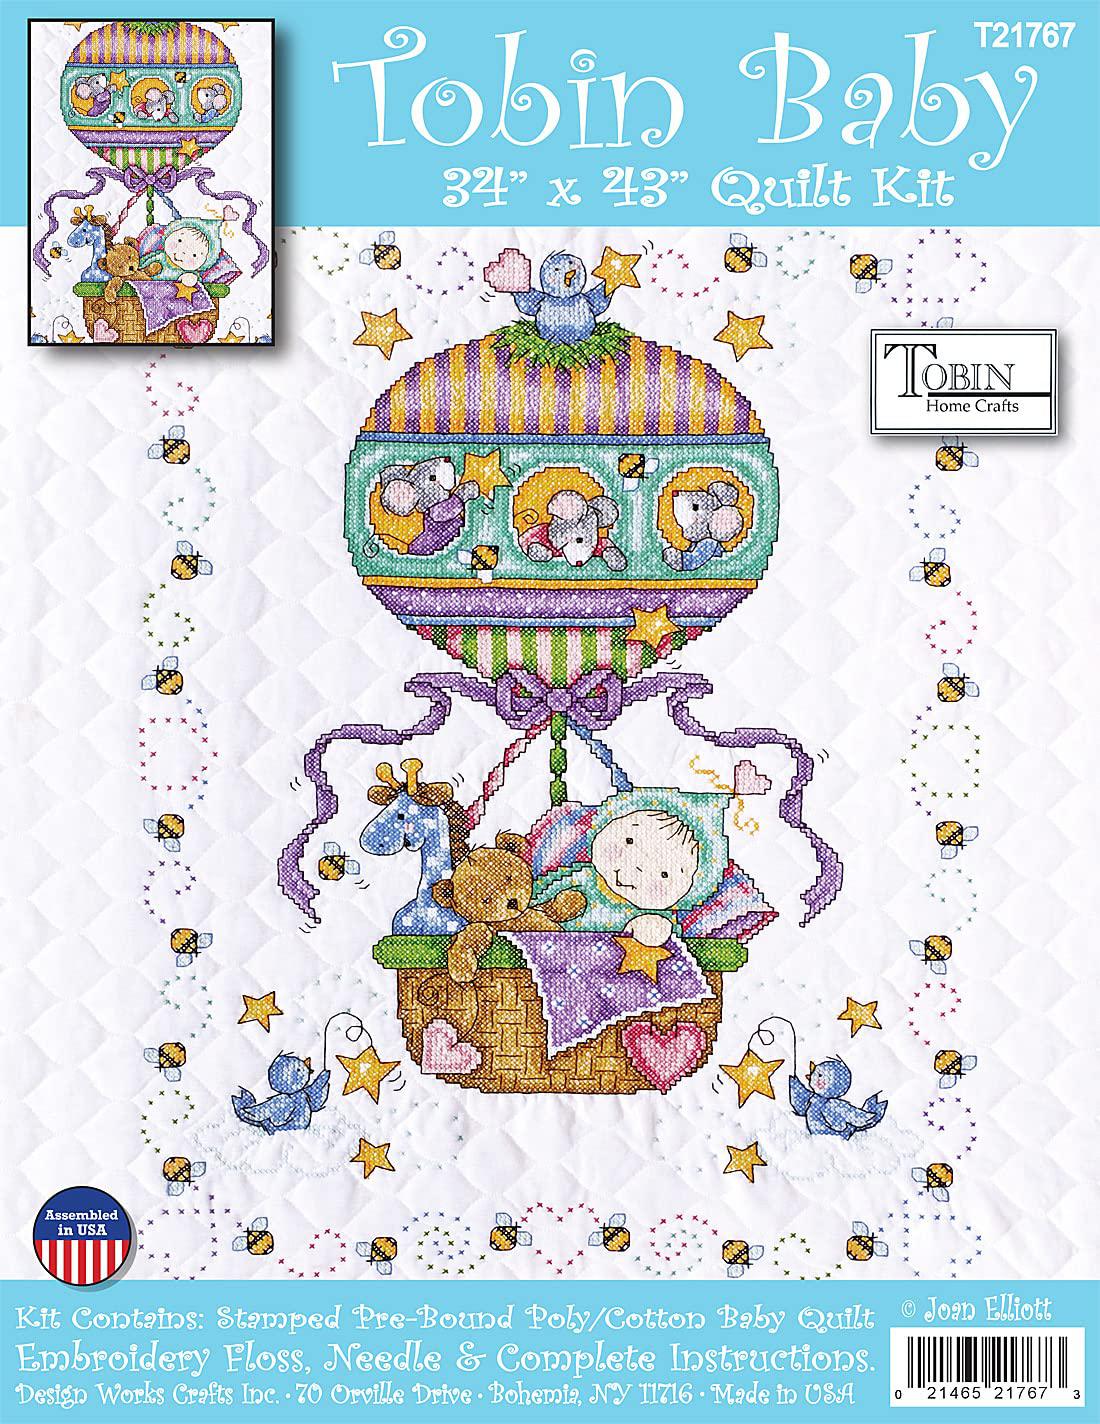 tobin balloon ride stamped for cross stitch baby quilt kit, 34"x43"